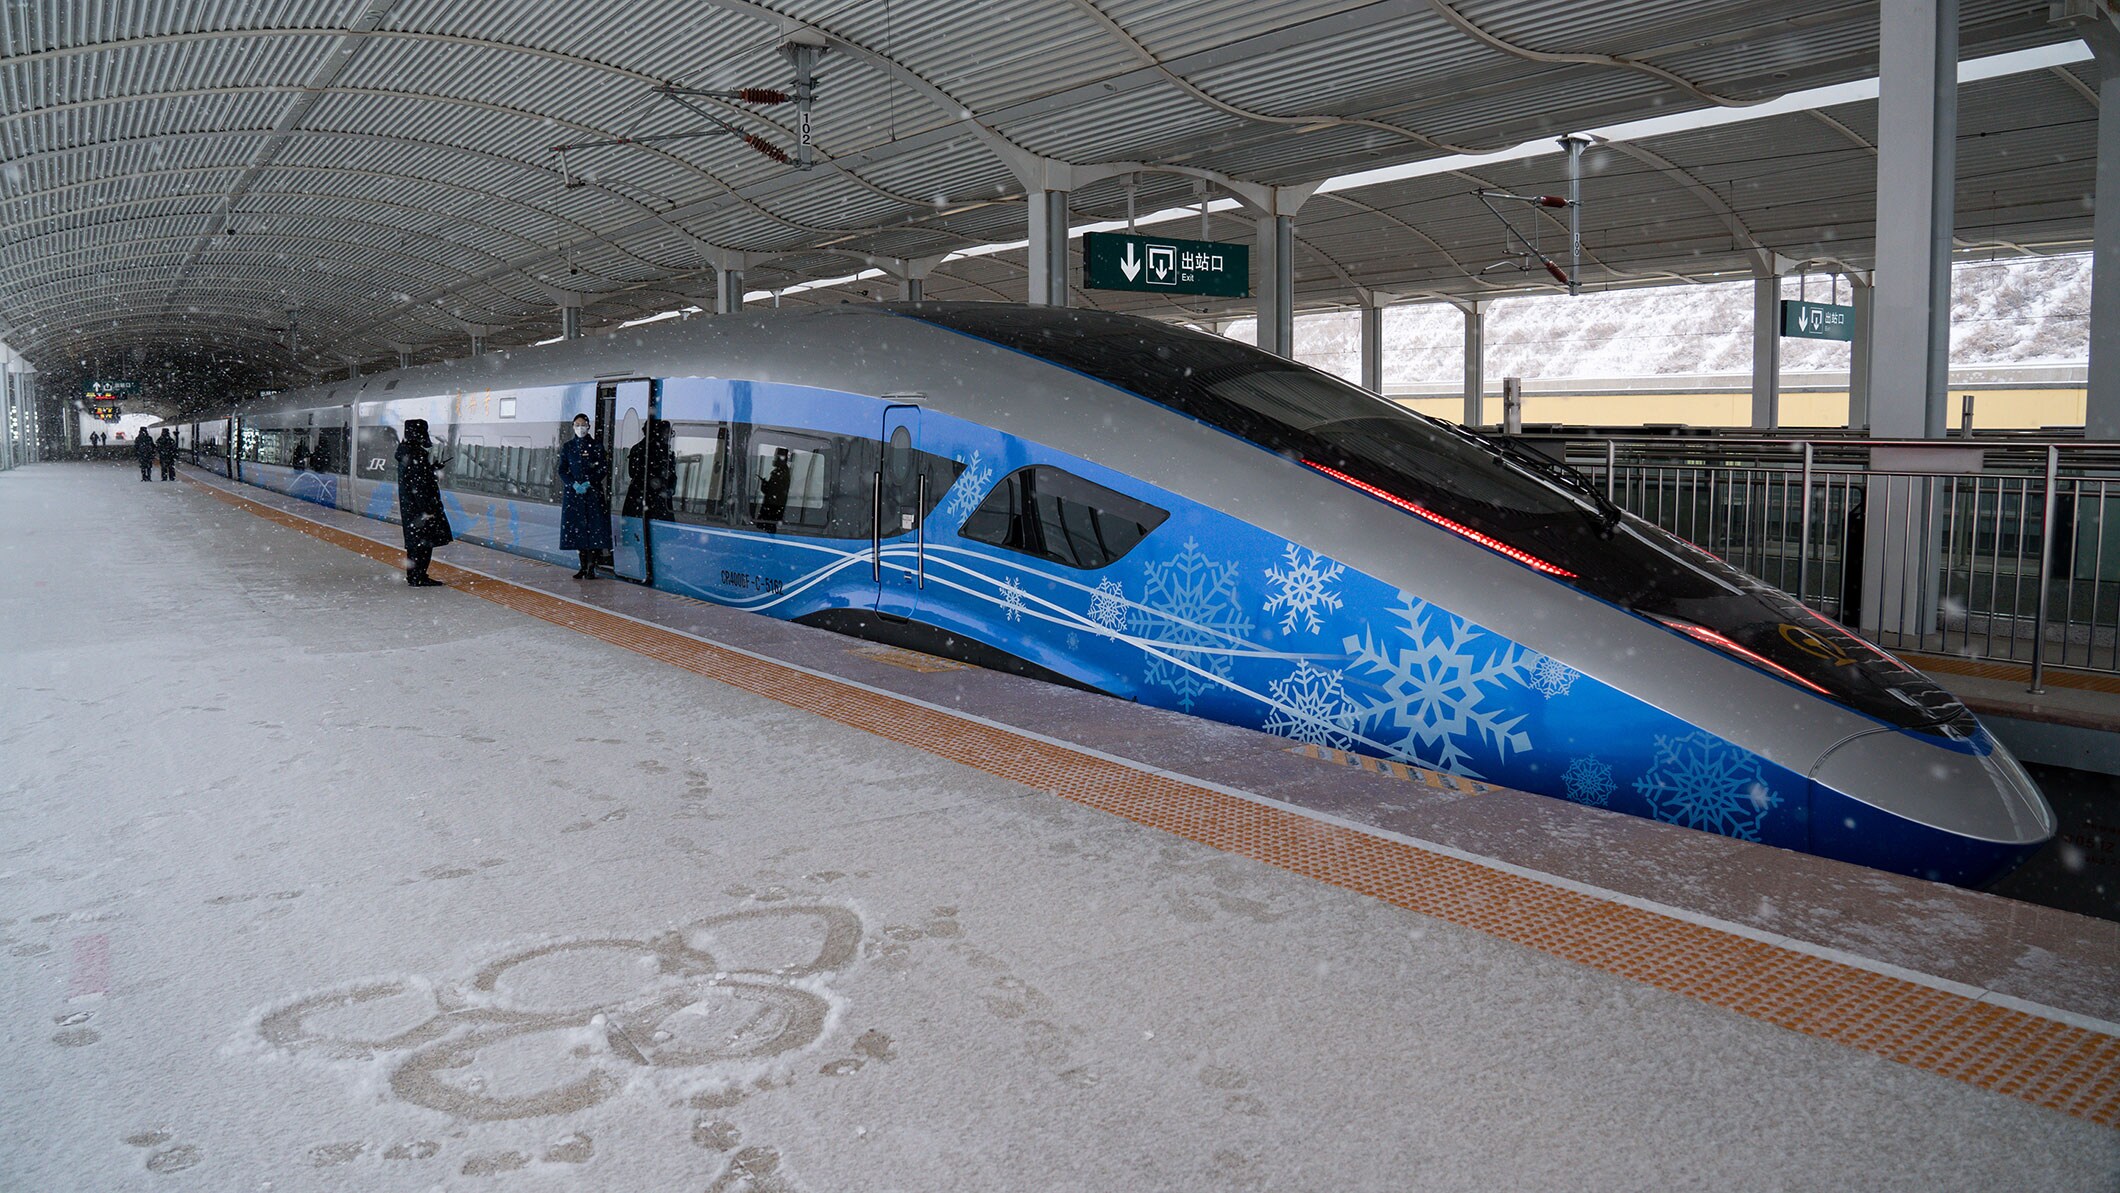 With trains able to travel at up to 350 kilometres per hour, the new Beijing-Zhangjiakou high-speed railway – which was delivered in time for the Olympic Games Beijing 2022 - had carried more than 6.8 million passengers within a year of its launch before the Games. 